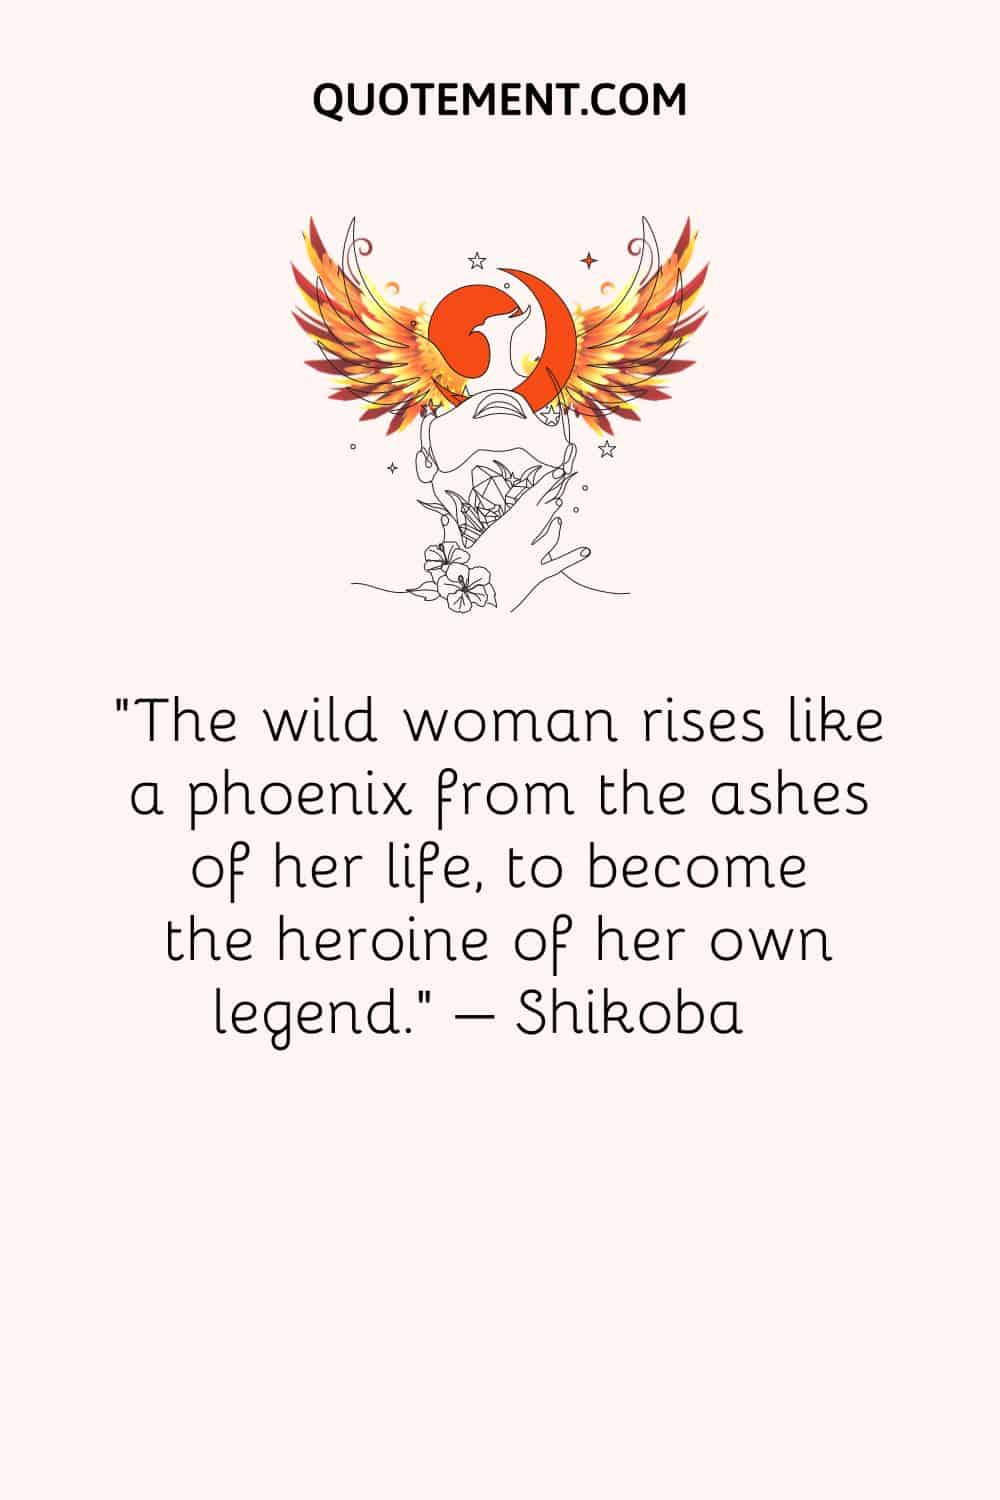 The wild woman rises like a phoenix from the ashes of her life, to become the heroine of her own legend